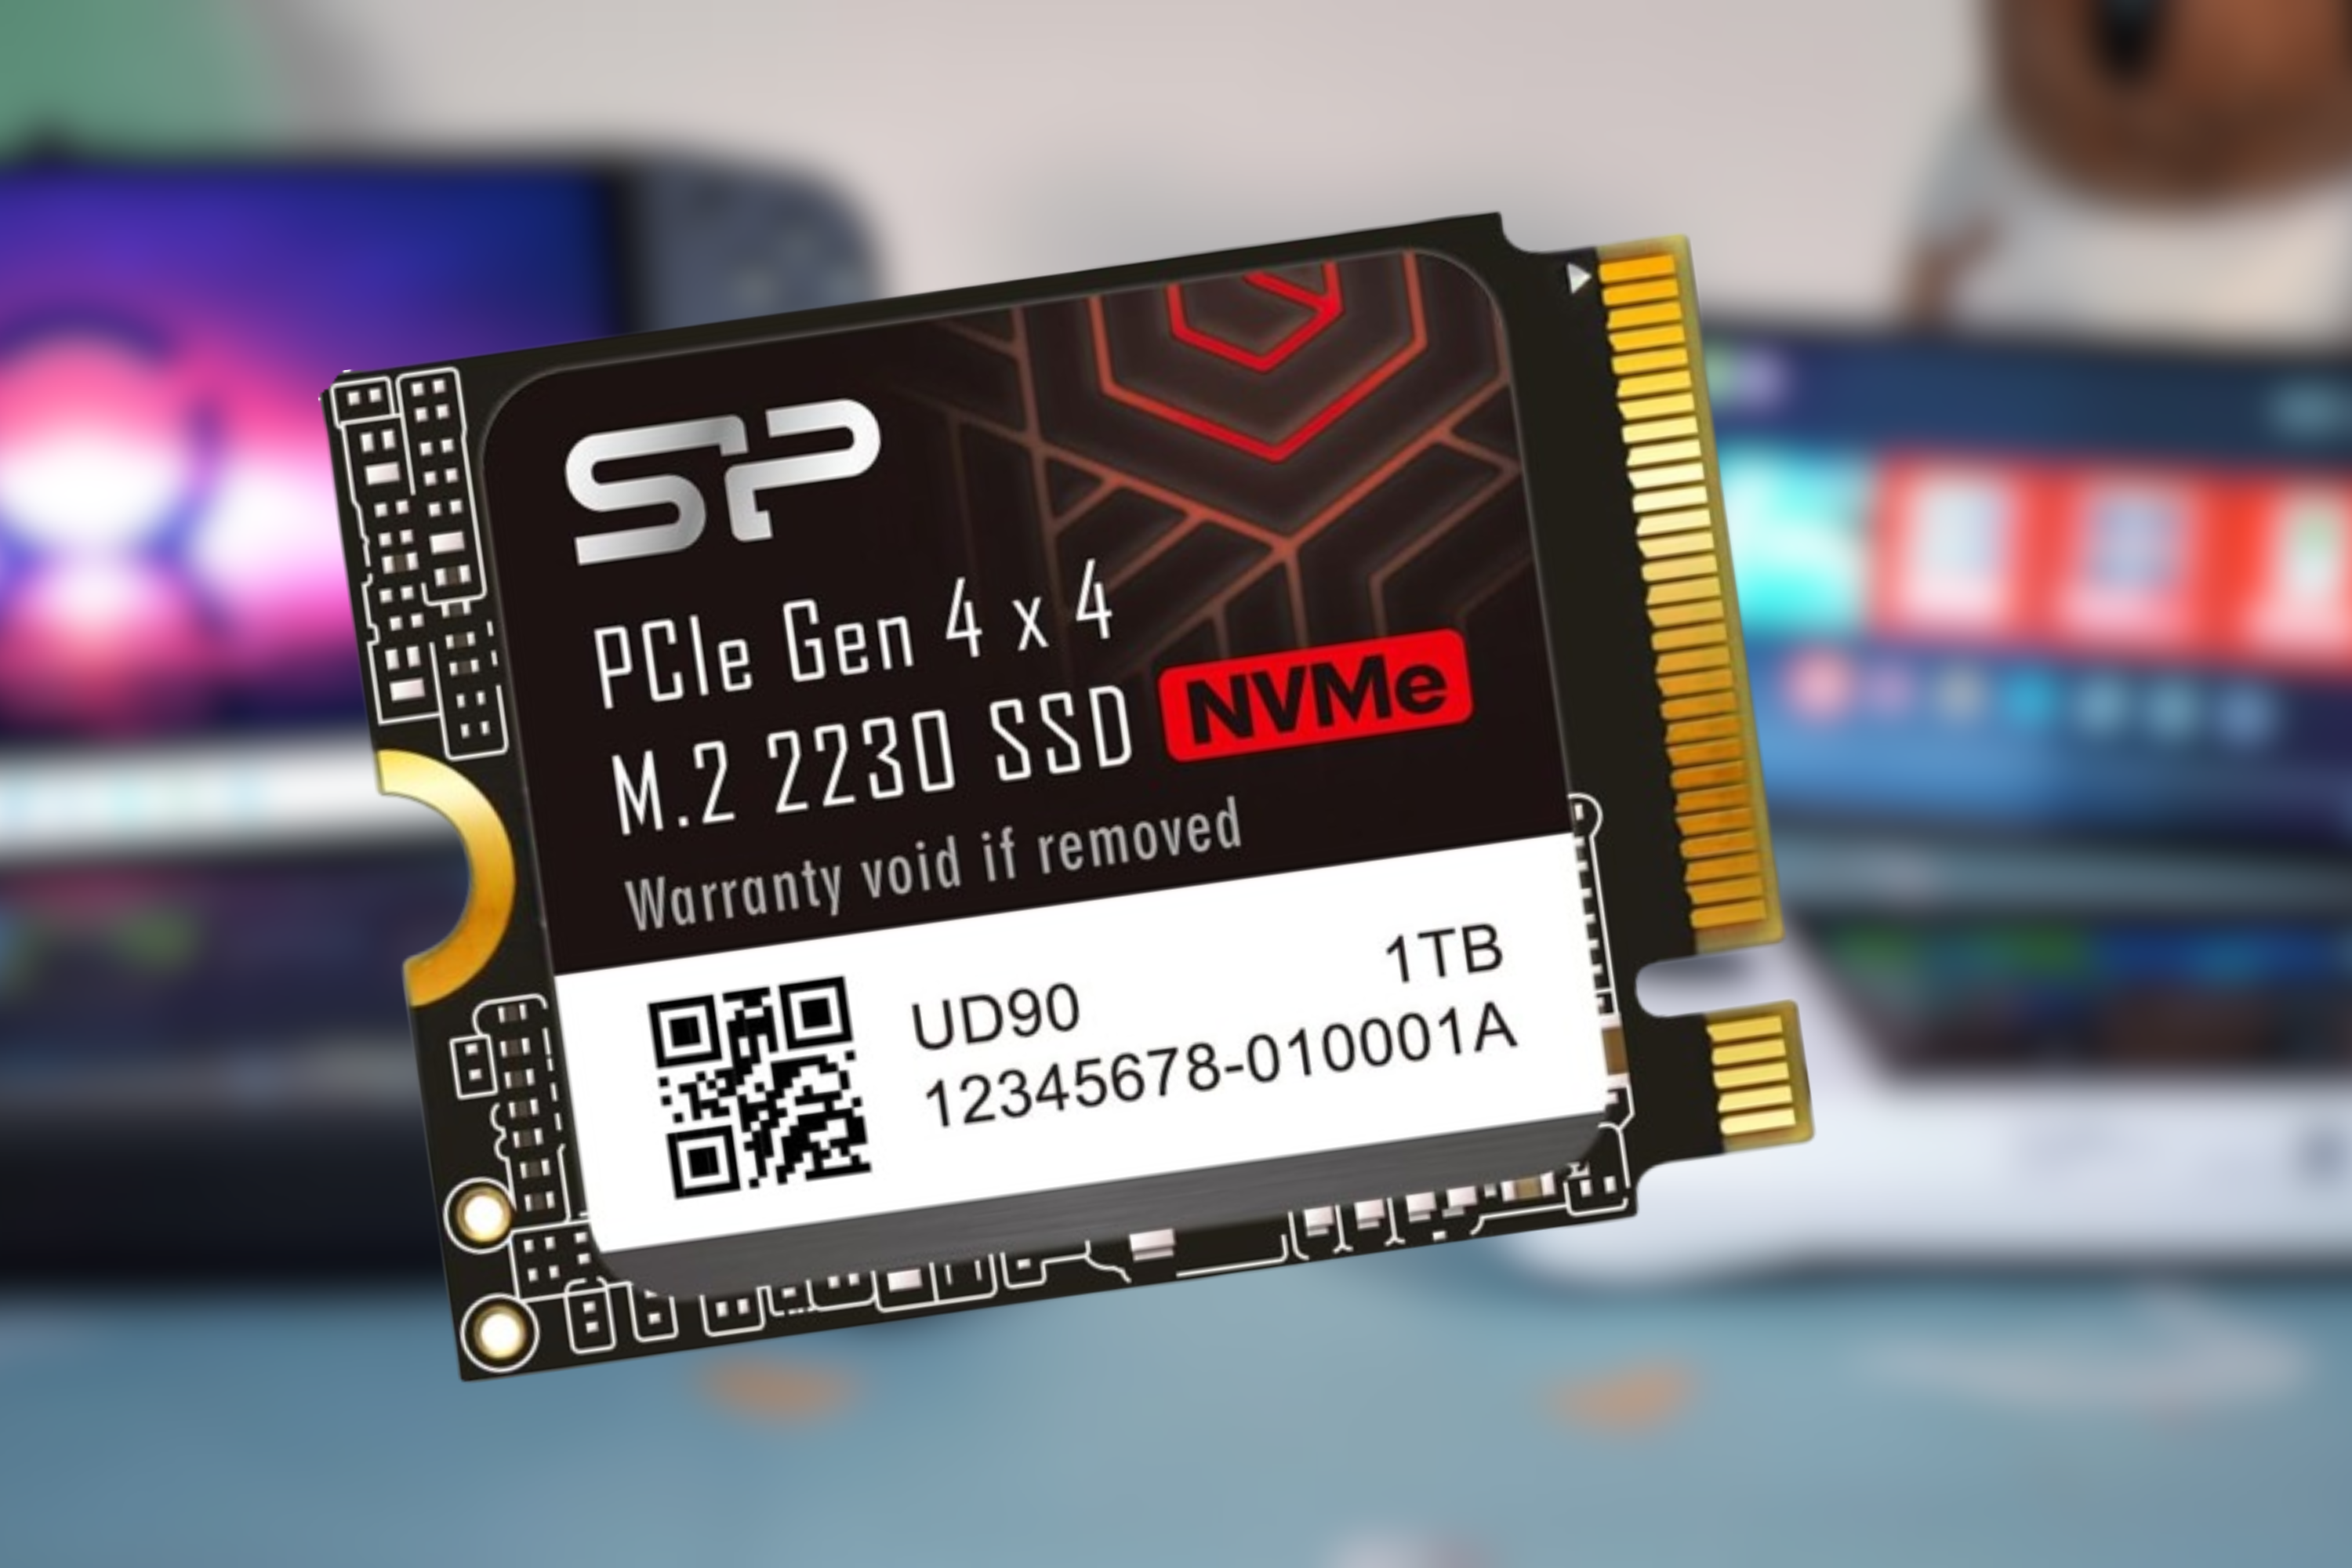 Silicon Power 1TB UD90 2230 NVMe 4.0 Gen4 PCIe M.2 SSD on blurred background 